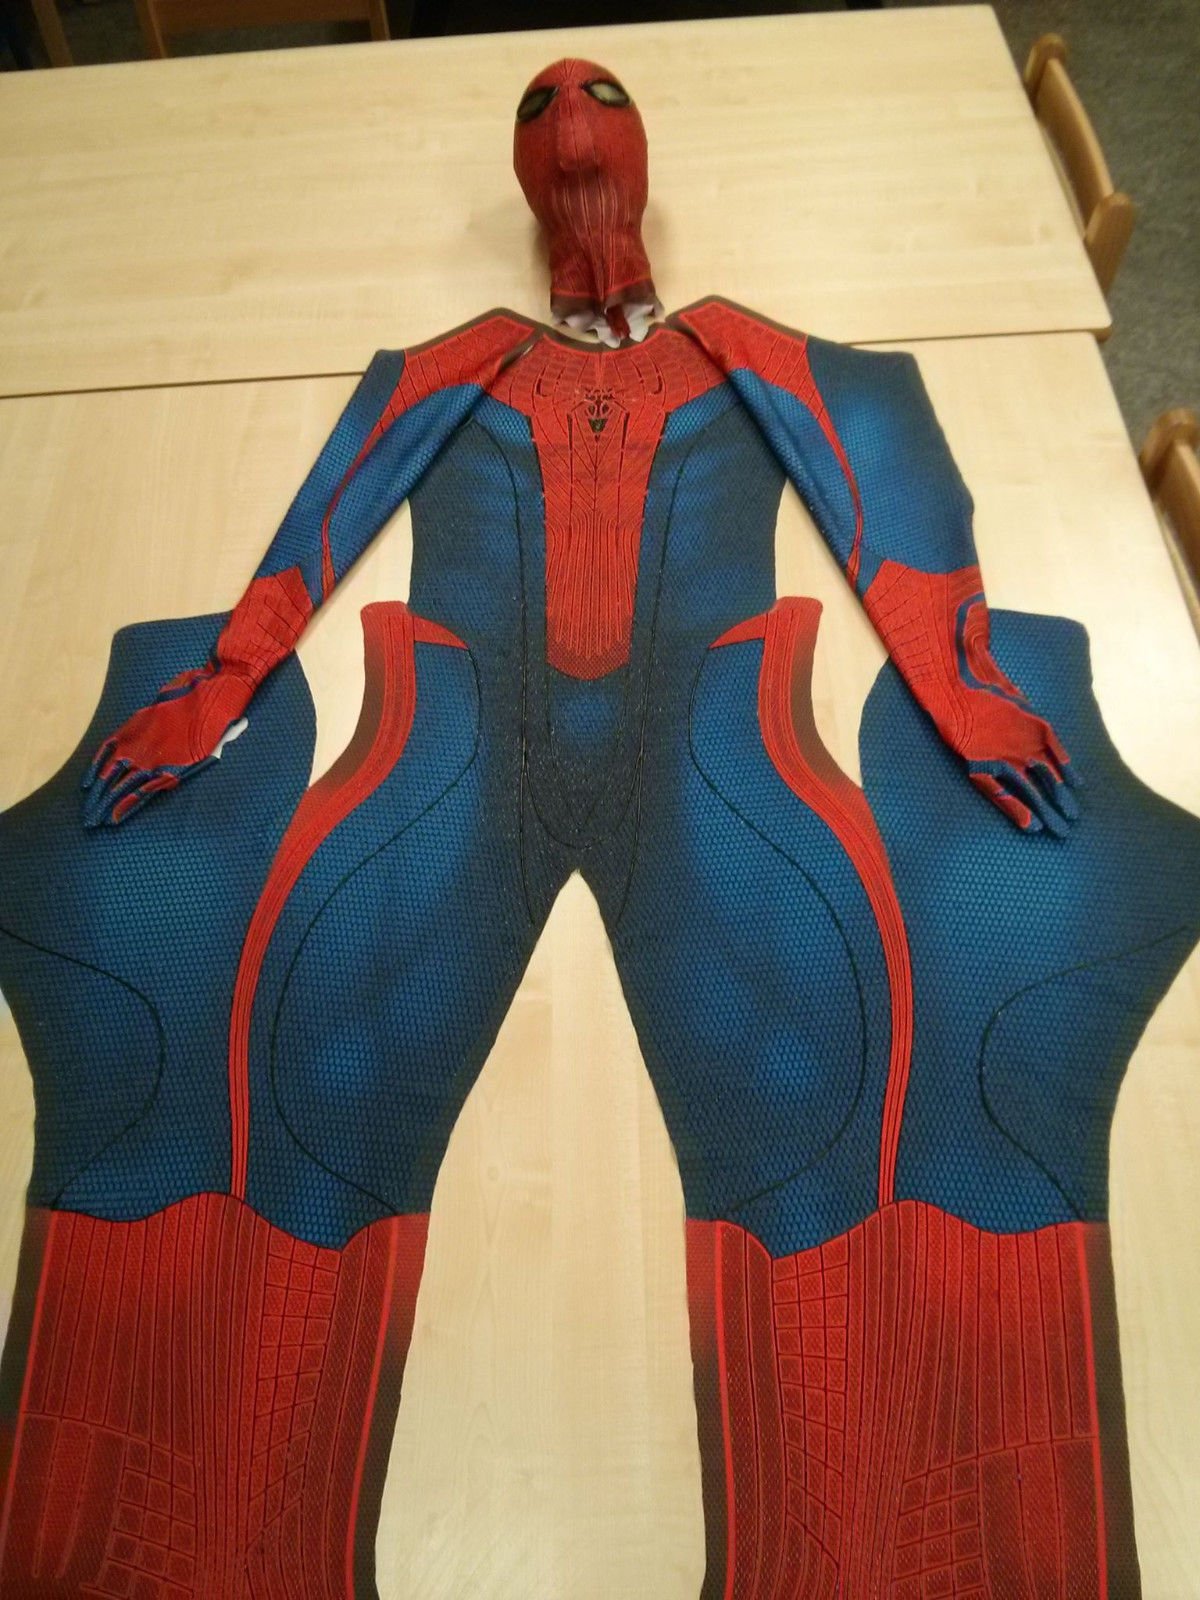 The winning bid on this Spider-Man costume was a cool 2,500